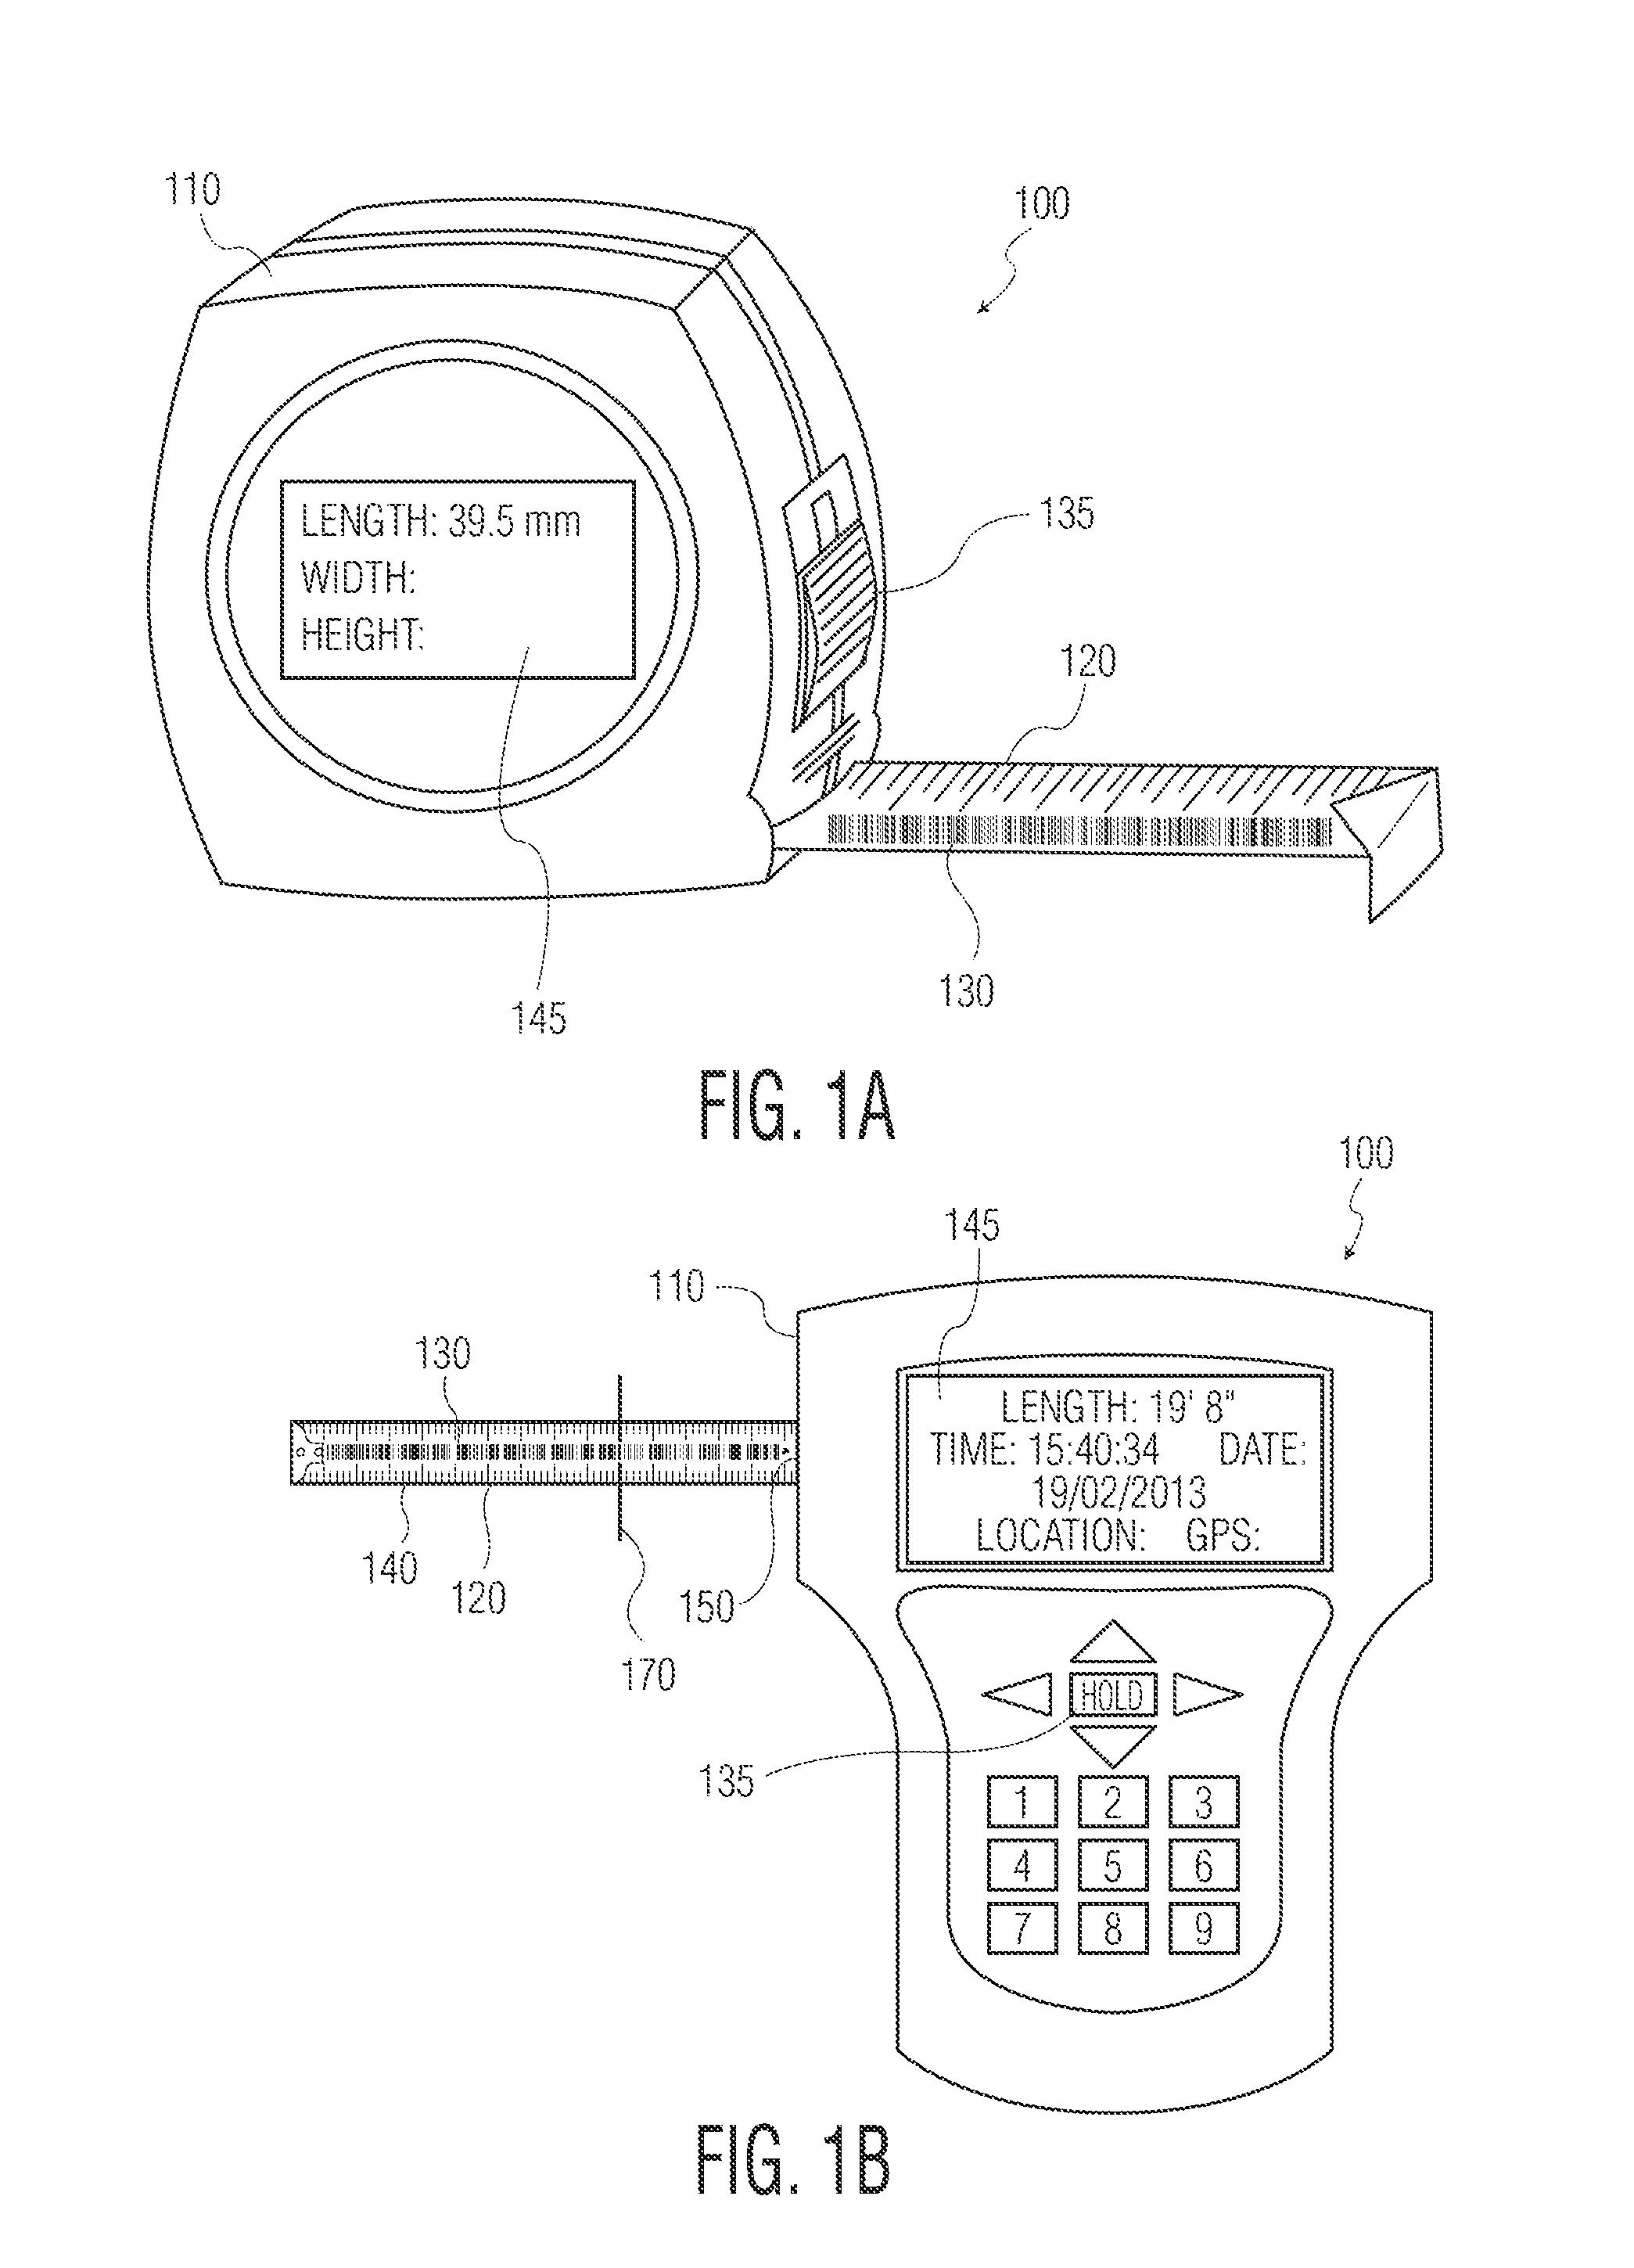 Self-Reading Measuring Device, System and Method